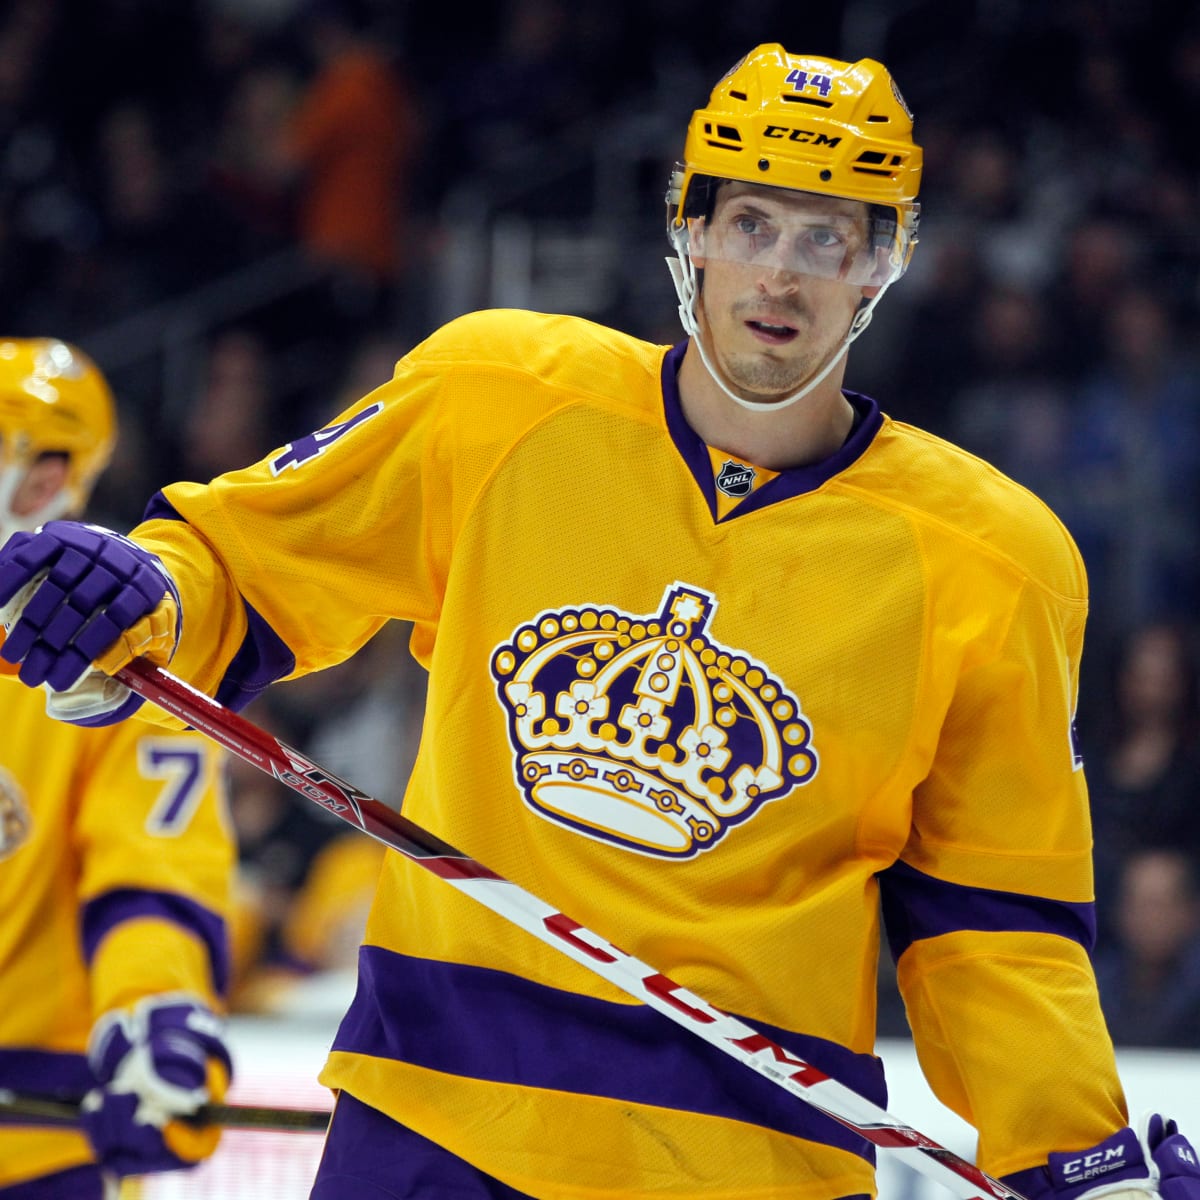 Kings' Vincent Lecavalier to retire after 17-year NHL career